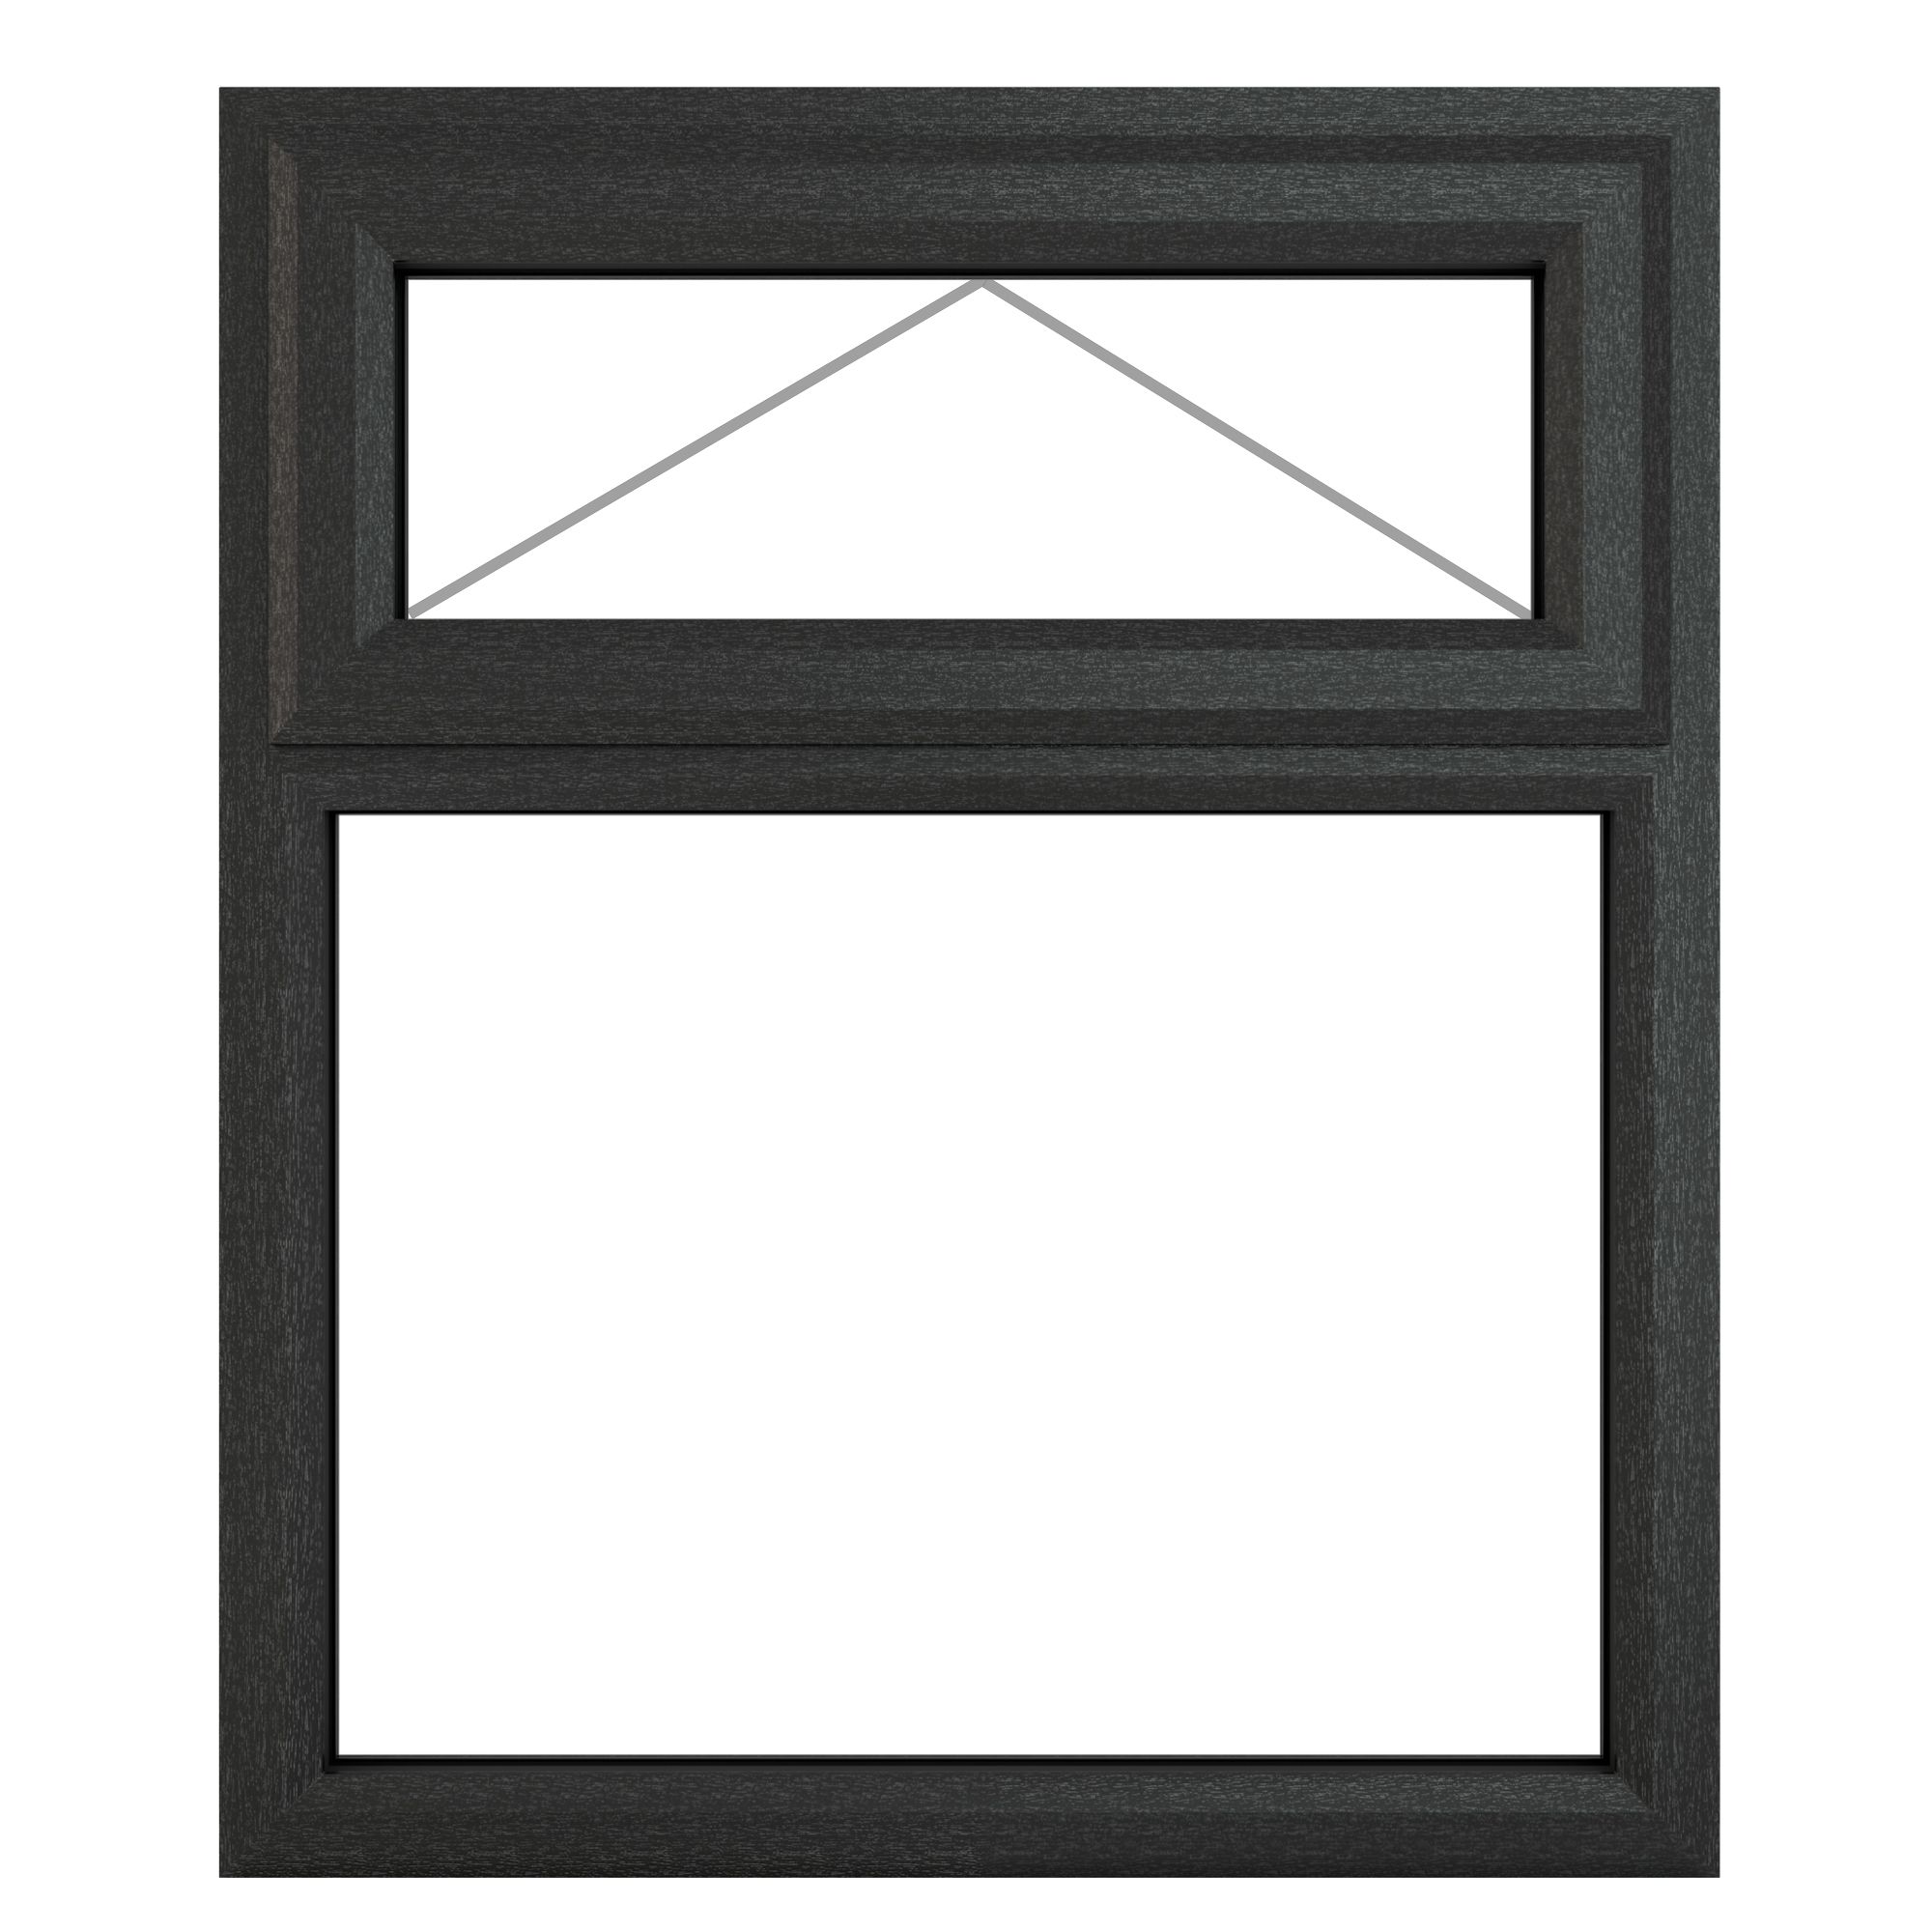 Fortia 2P Clear Glazed Anthracite uPVC Top hung Window, (H)1115mm (W)905mm